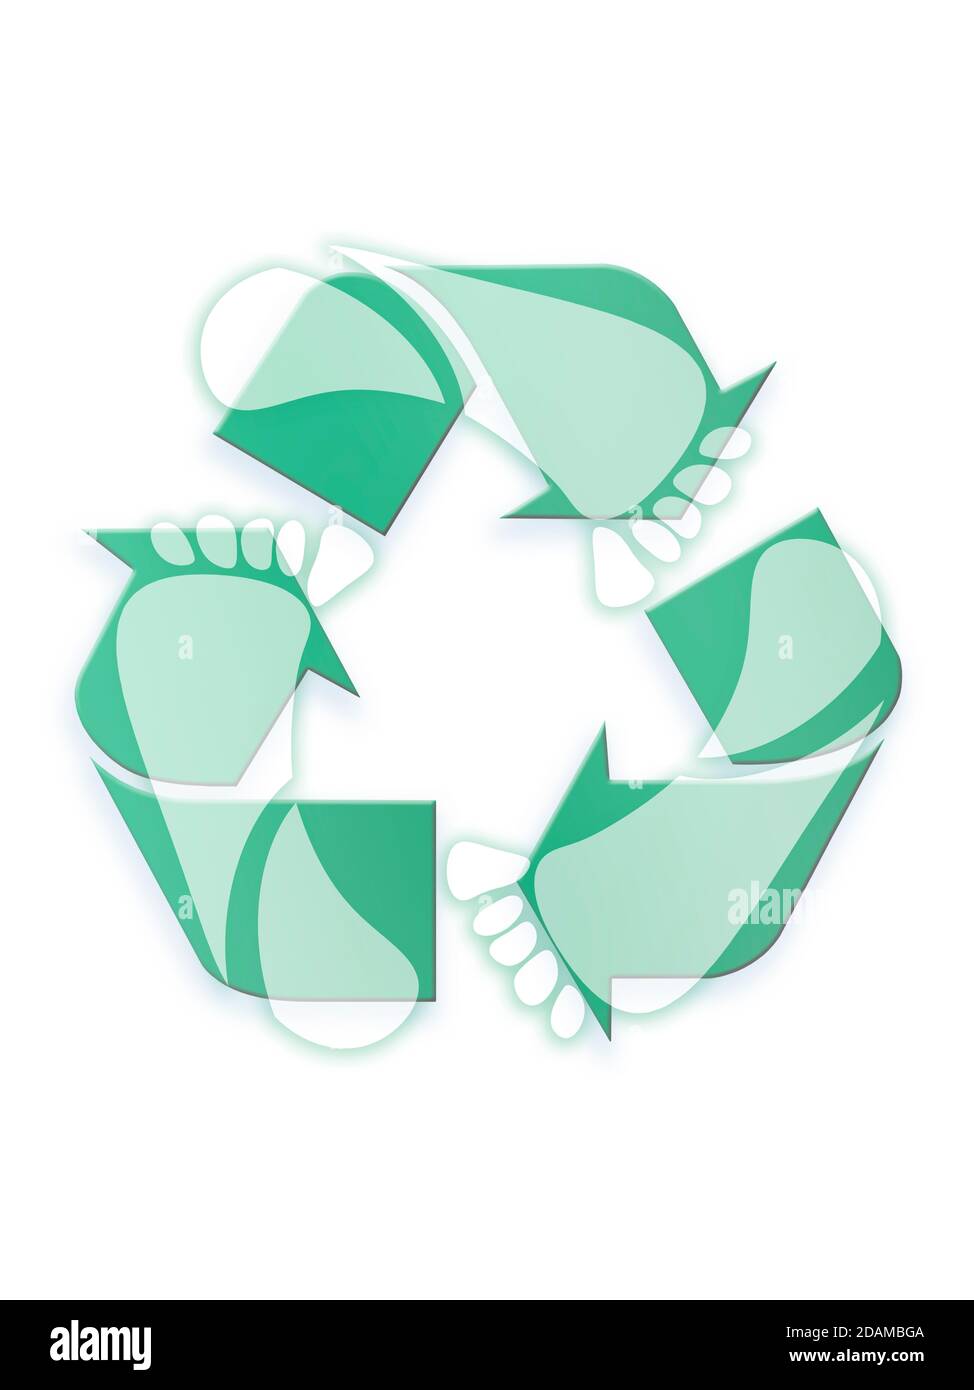 Recycling symbol with footprints, illustration. Stock Photo